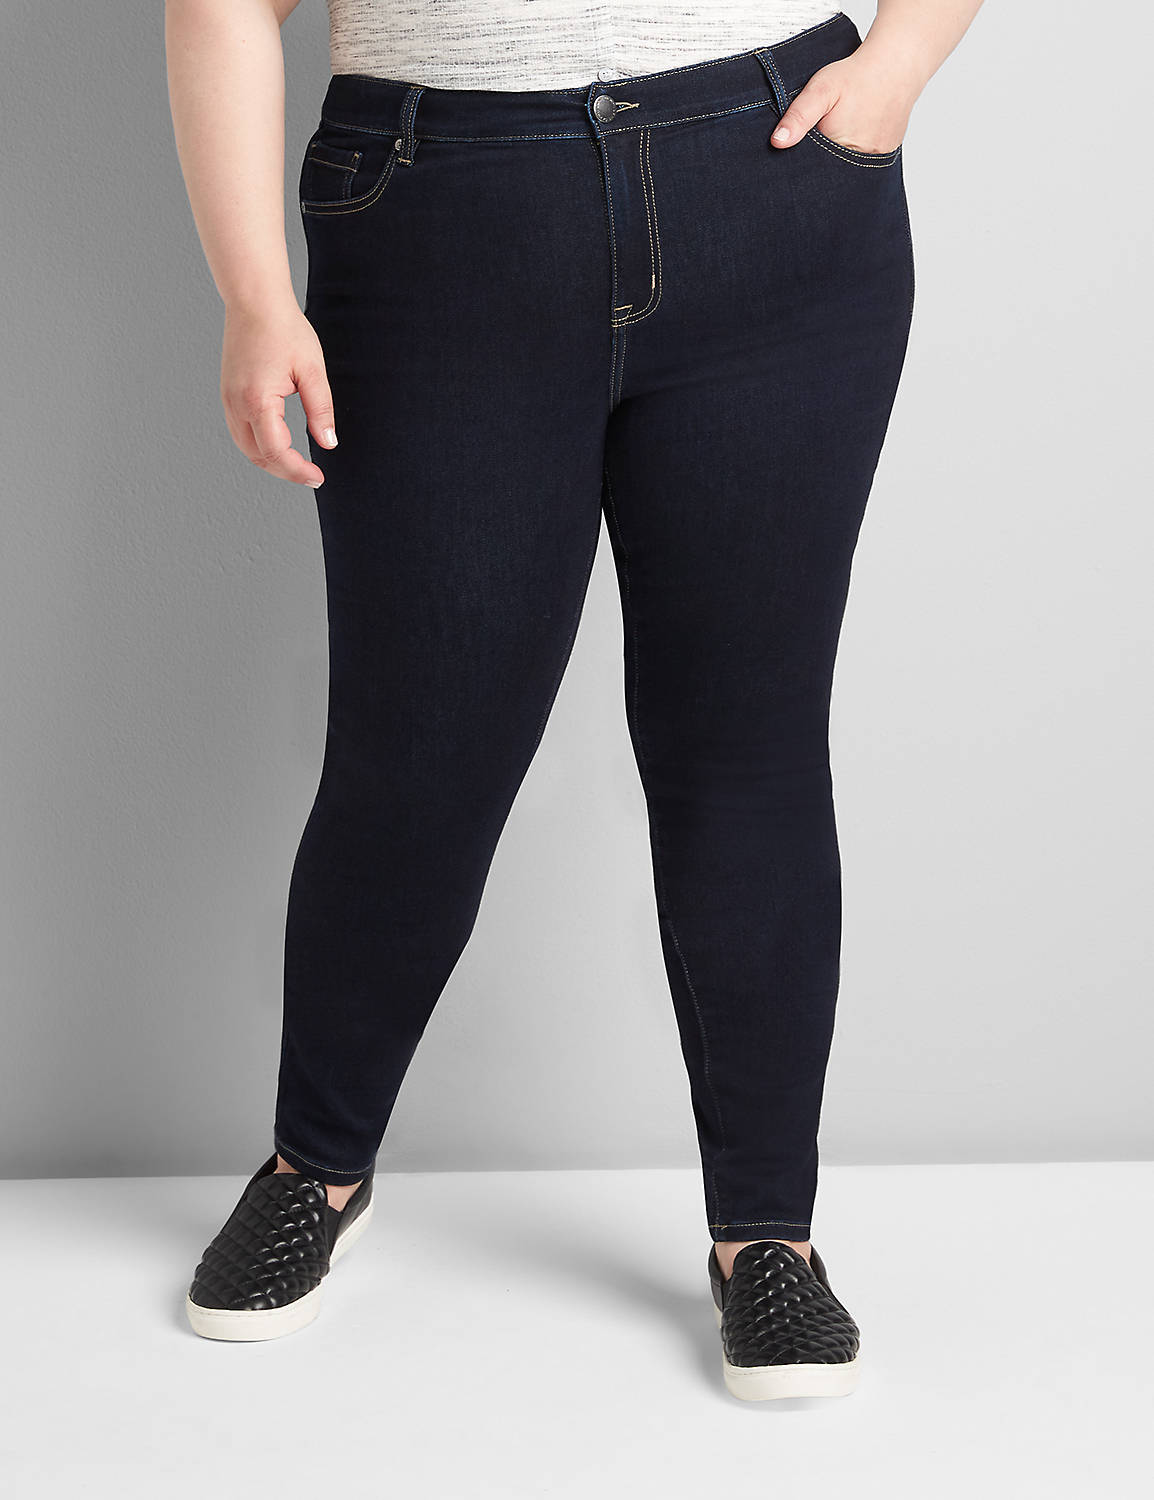 Straight Fit High-Rise Skinny Jean - Dark Wash Product Image 1